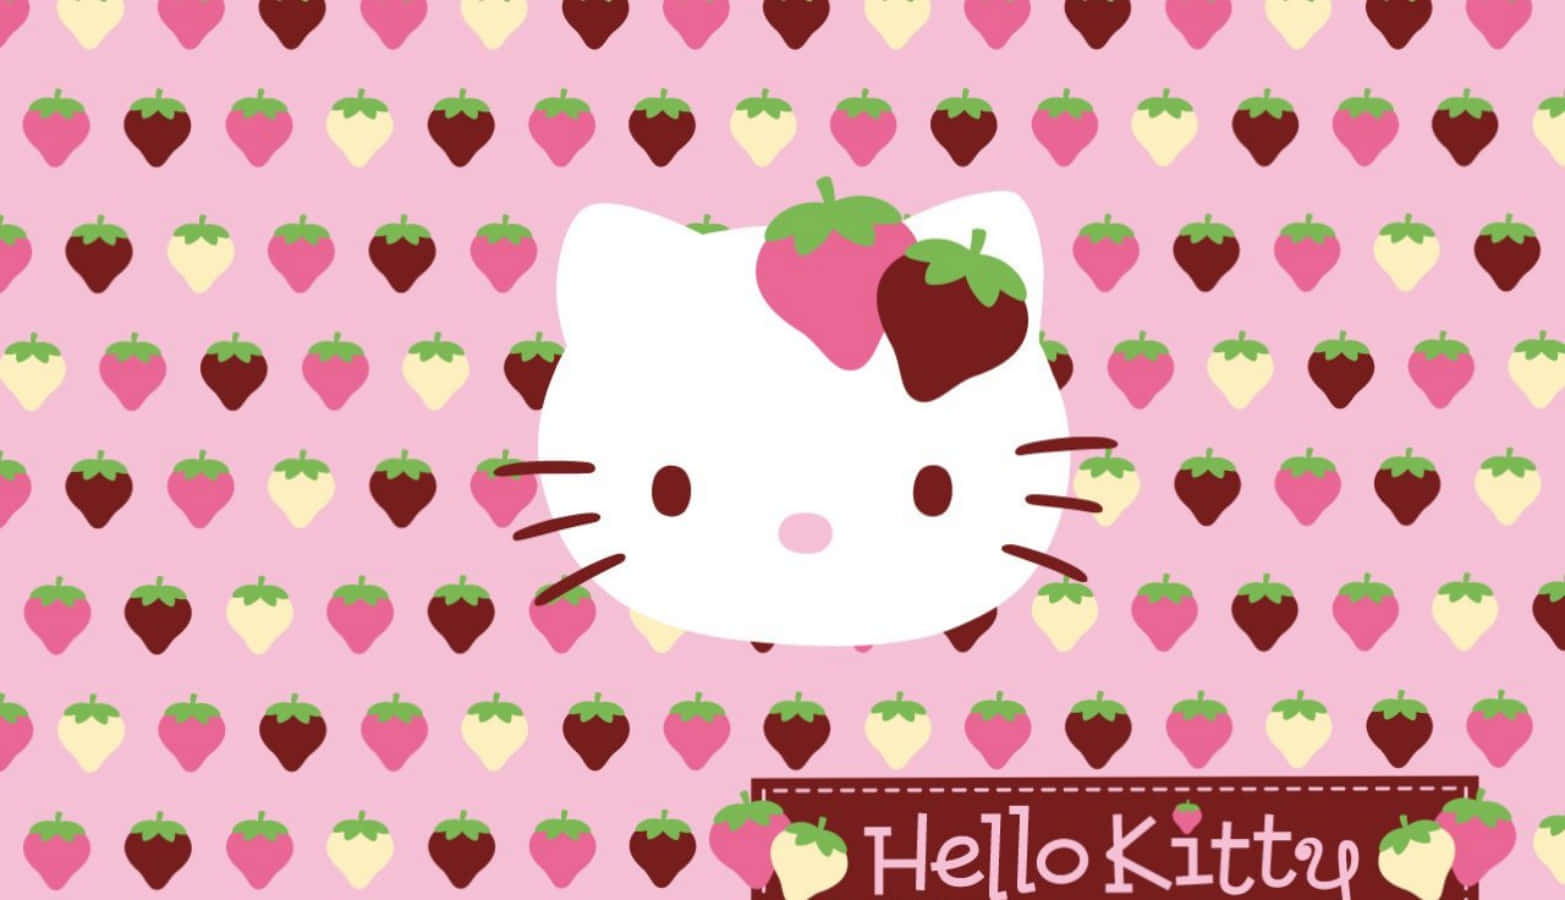 Get Ready For School With A Fun & Functional Hello Kitty Laptop Background